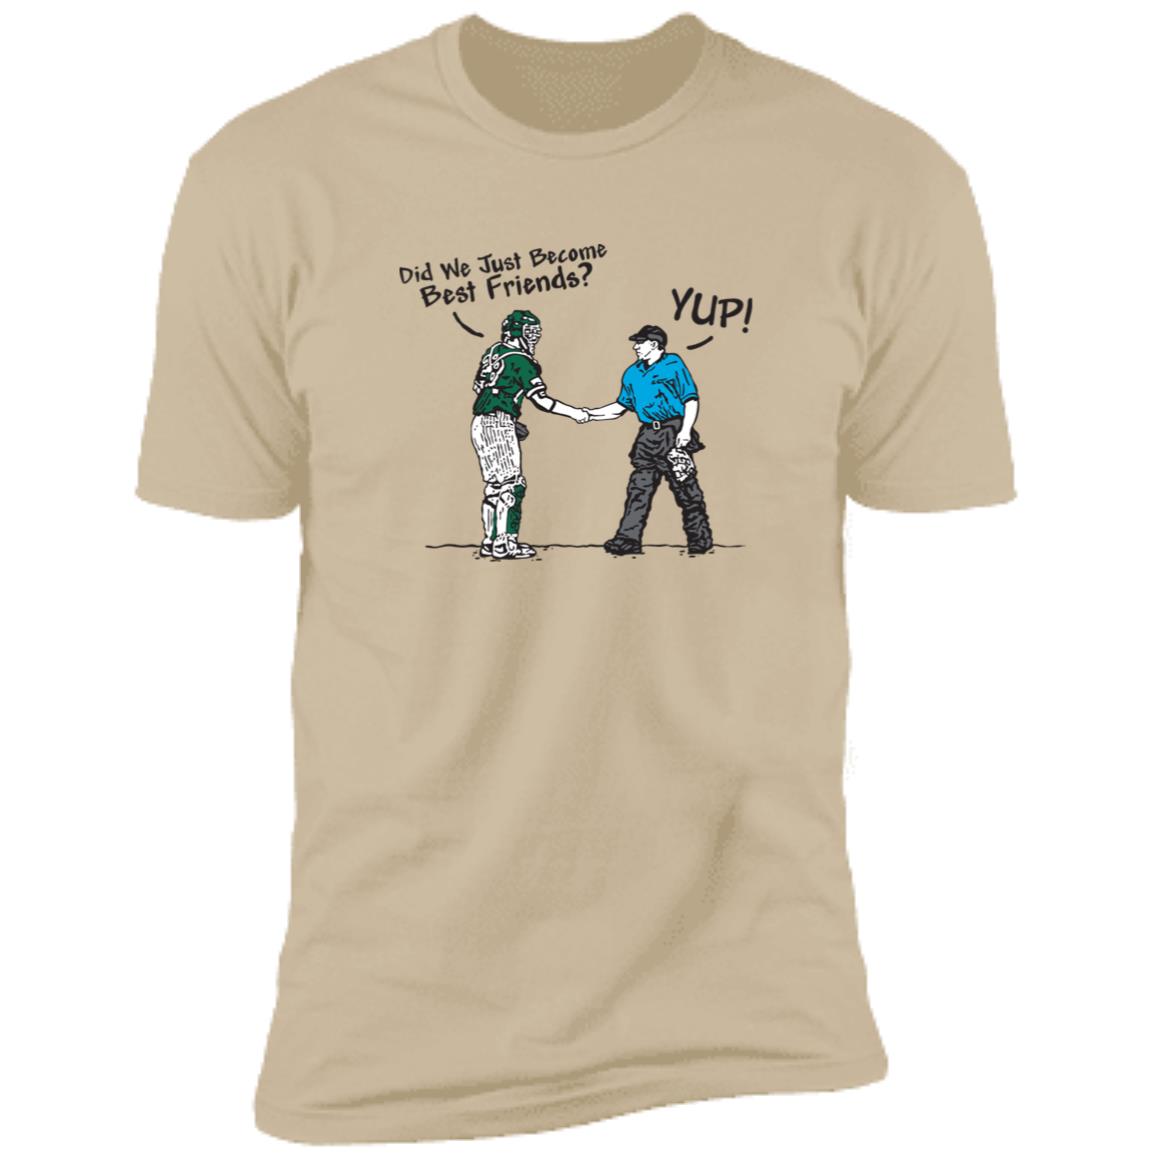 The Catching Guy Best Friends Tee tan